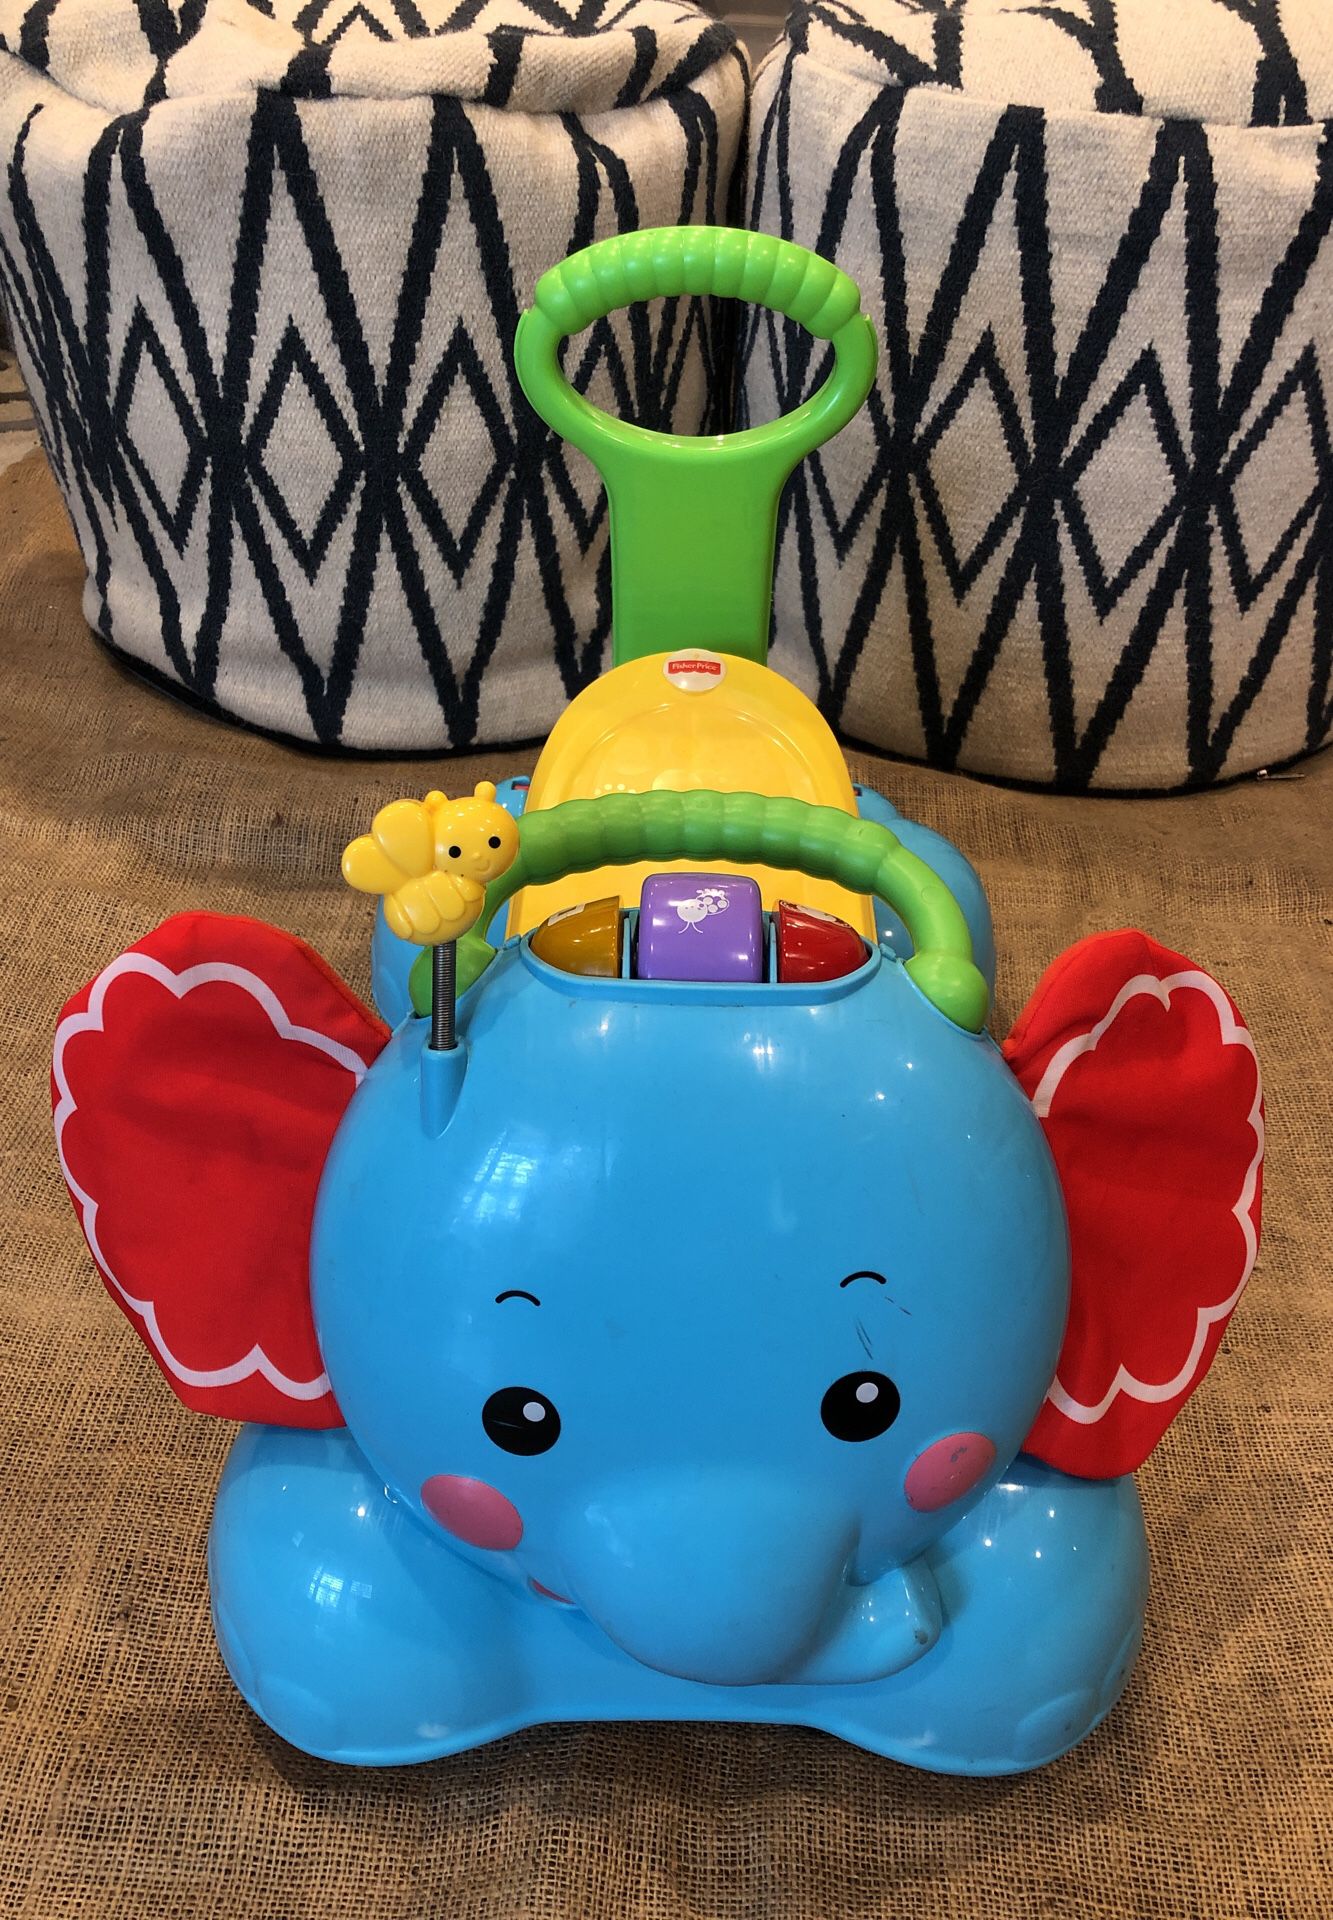 Walker/Rider Elephant Fisher Price sings, plays music, lights up